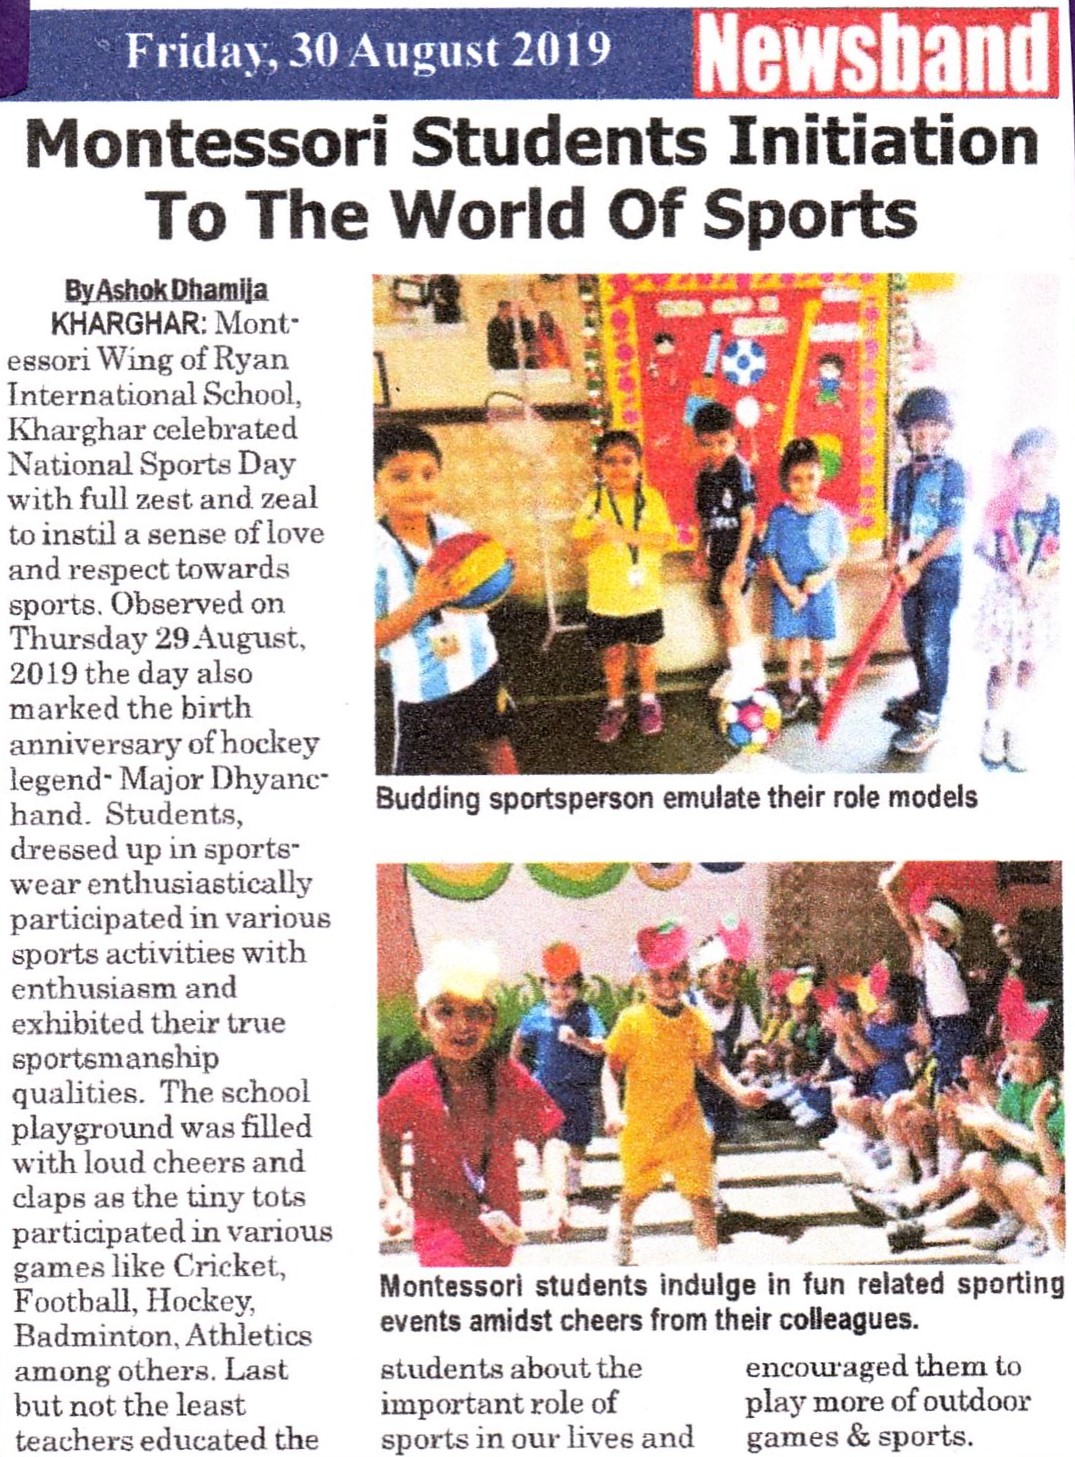 Montessori Student’s initiation to the world of  Sports was mentioned in News band - Ryan International School, Kharghar - Ryan Group